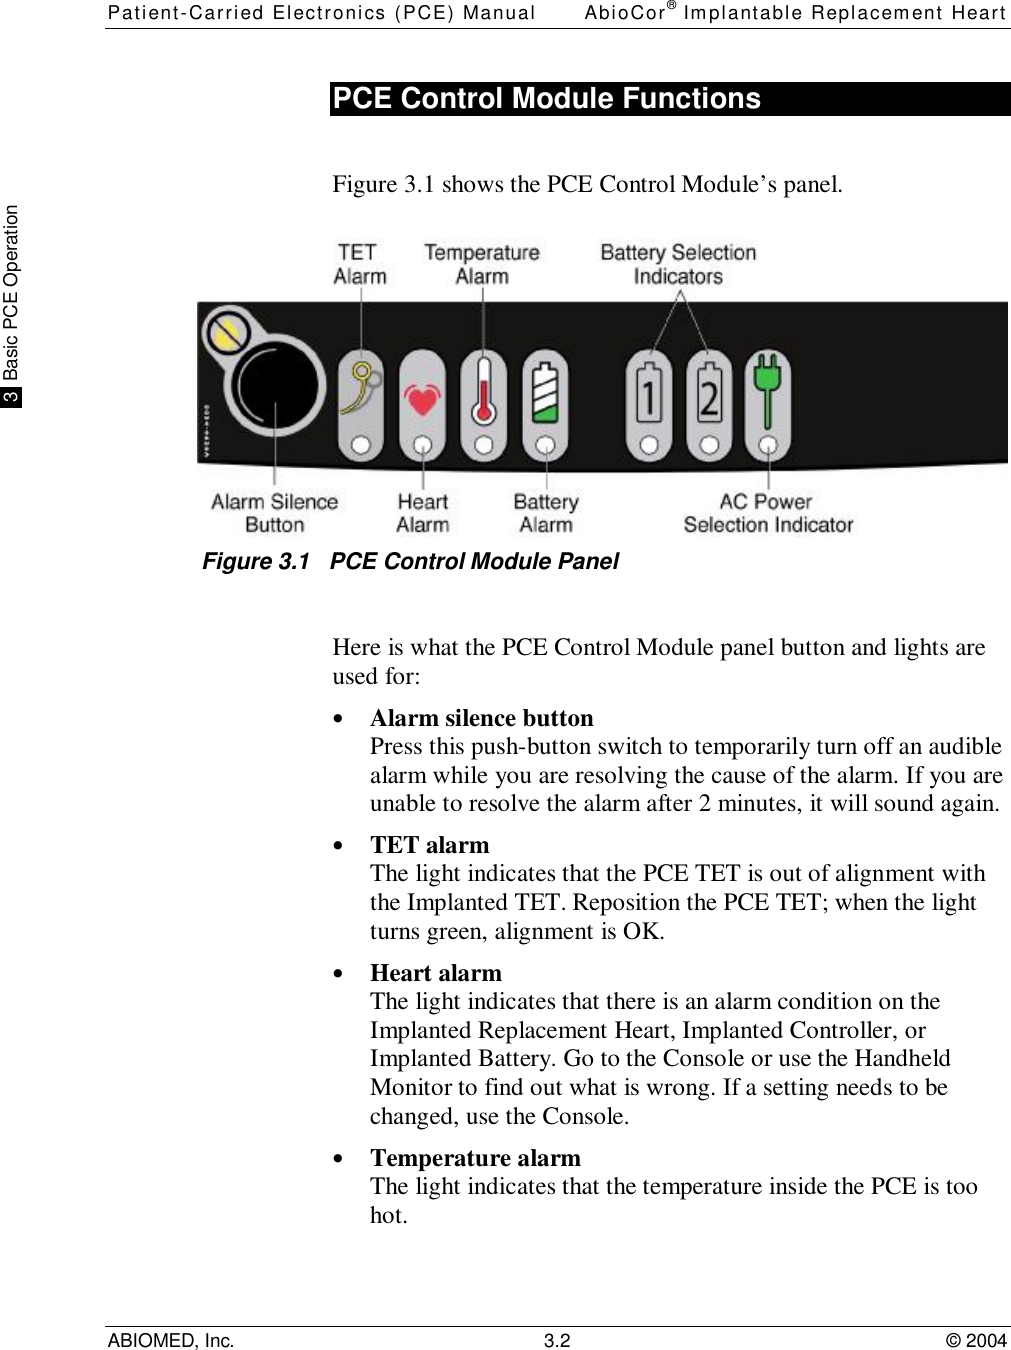 Patient-Carried Electronics (PCE) Manual AbioCor® Implantable Replacement HeartABIOMED, Inc. 3.2 © 2004 3  Basic PCE OperationPCE Control Module FunctionsFigure 3.1 shows the PCE Control Module’s panel.Figure 3.1   PCE Control Module PanelHere is what the PCE Control Module panel button and lights areused for:• Alarm silence buttonPress this push-button switch to temporarily turn off an audiblealarm while you are resolving the cause of the alarm. If you areunable to resolve the alarm after 2 minutes, it will sound again.• TET alarmThe light indicates that the PCE TET is out of alignment withthe Implanted TET. Reposition the PCE TET; when the lightturns green, alignment is OK.• Heart alarmThe light indicates that there is an alarm condition on theImplanted Replacement Heart, Implanted Controller, orImplanted Battery. Go to the Console or use the HandheldMonitor to find out what is wrong. If a setting needs to bechanged, use the Console.• Temperature alarmThe light indicates that the temperature inside the PCE is toohot.